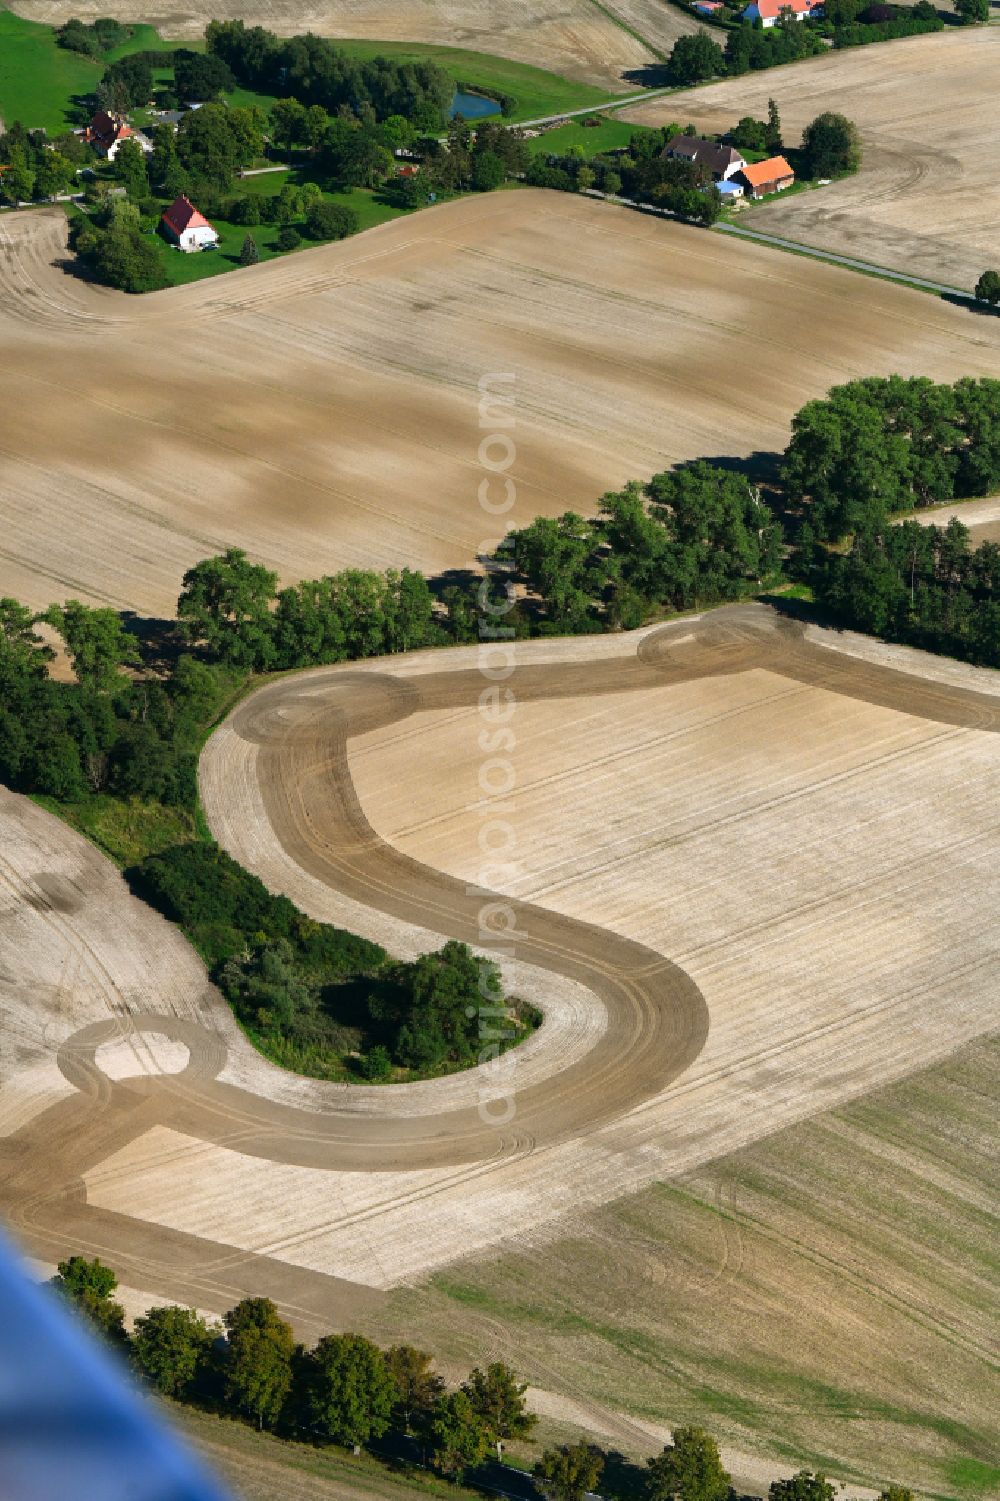 Philippshof from the bird's eye view: Island of trees in a harvested field in Philippshof in the state Mecklenburg - Western Pomerania, Germany